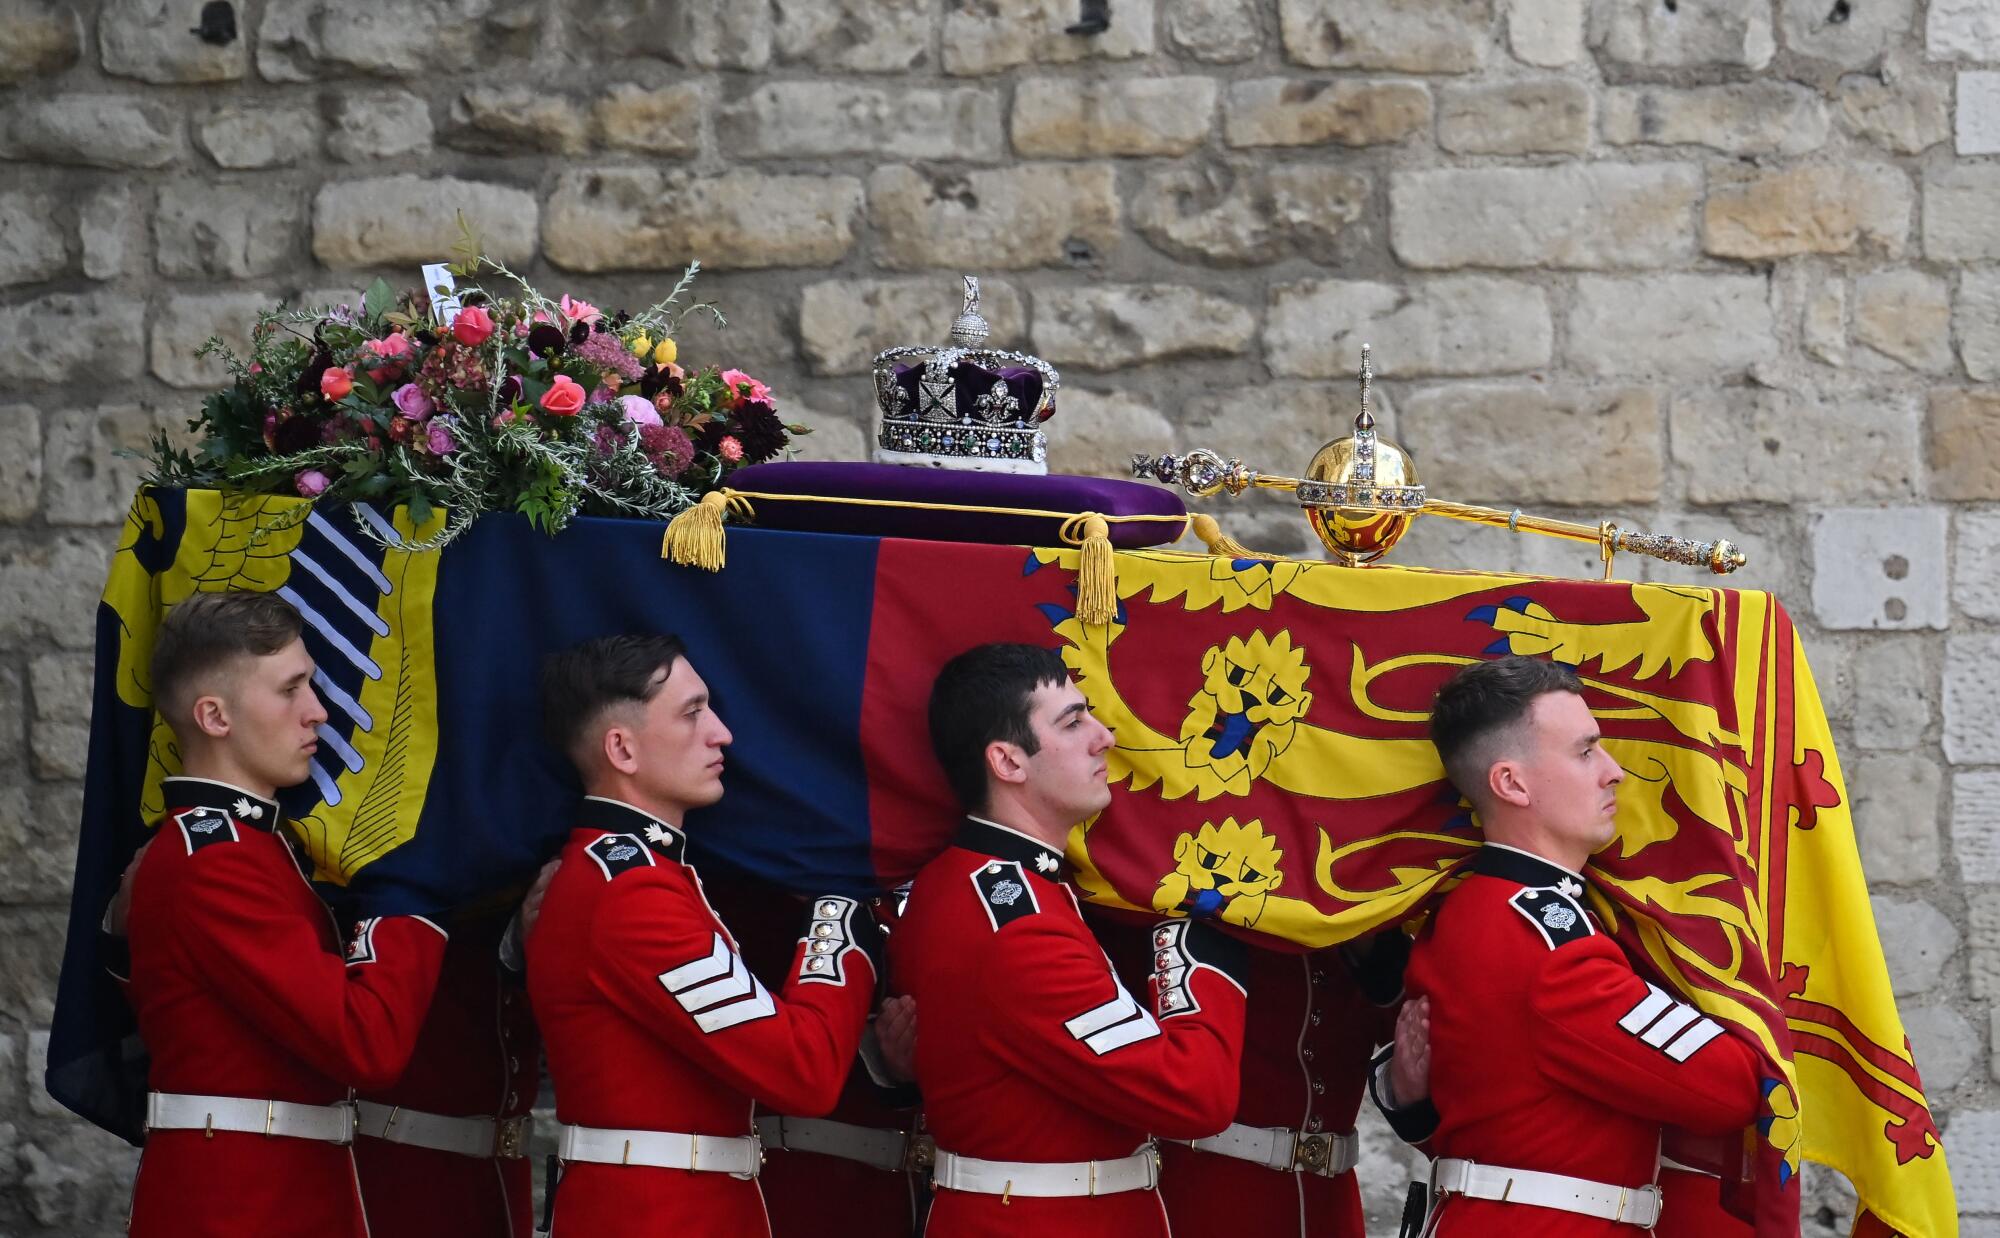 Men in red uniform carry a flag-draped coffin, which is covered with flowers, orb and sceptre and crown on a purple cushion.